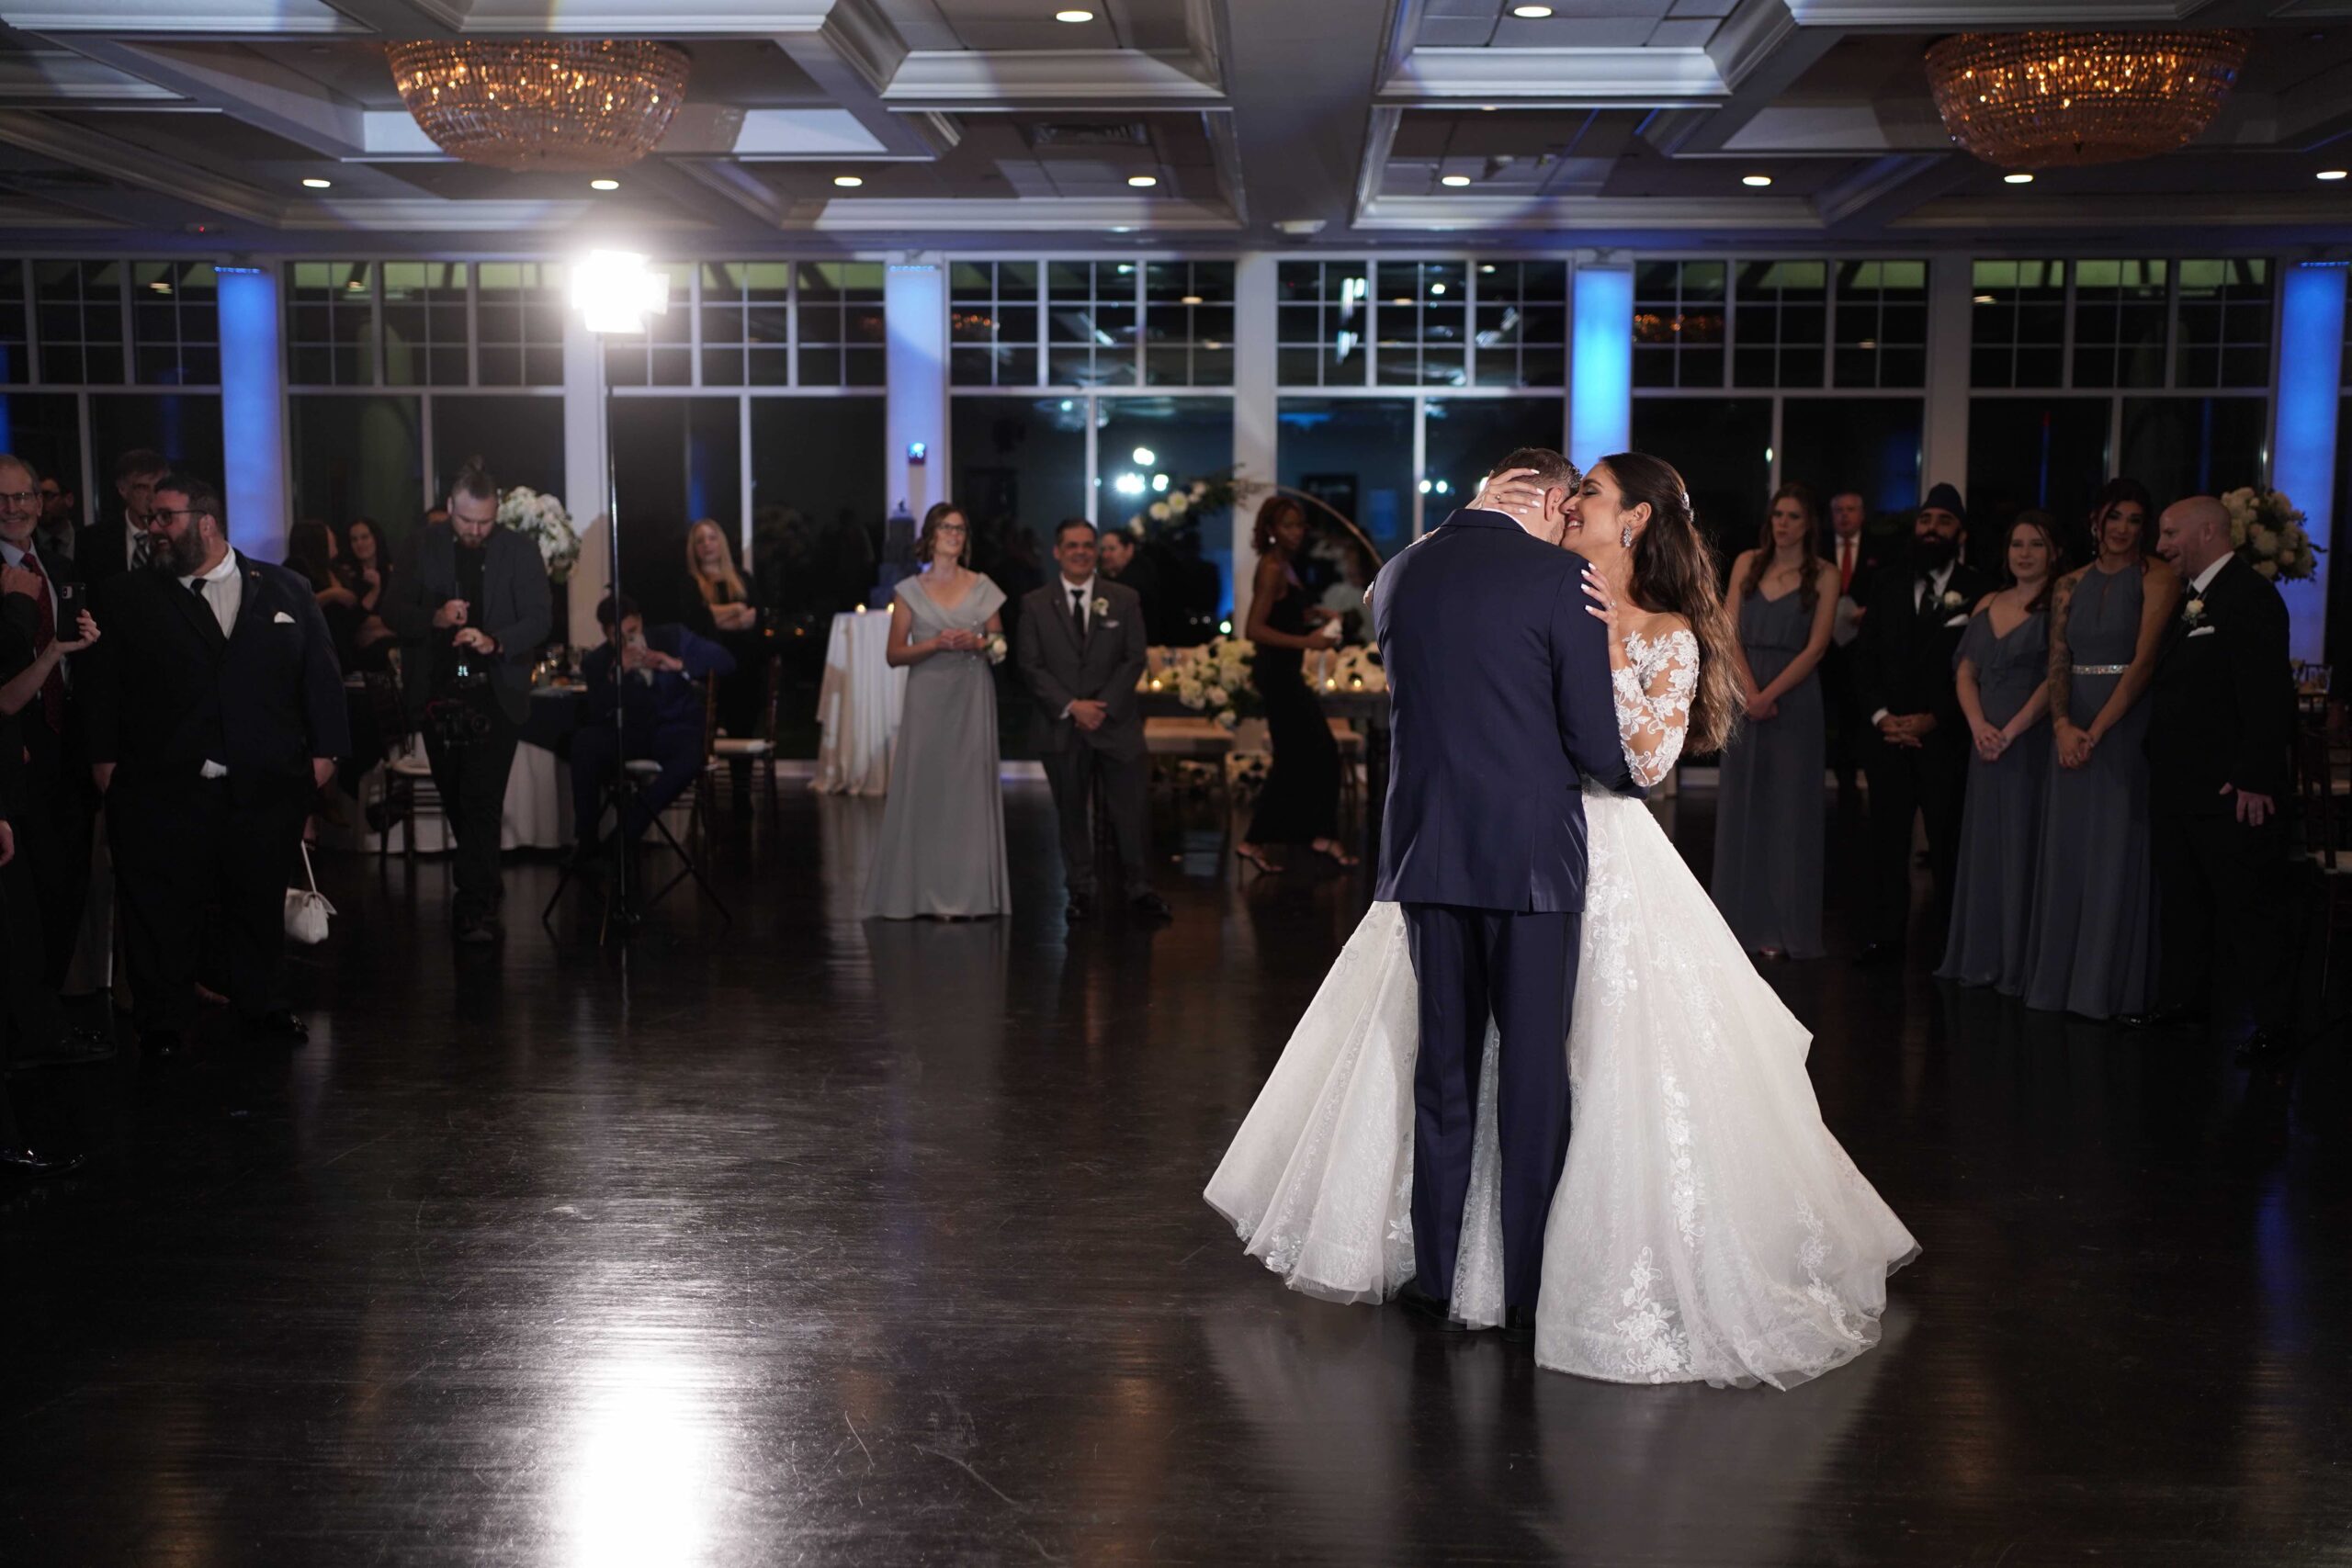 Make Your Wedding Dance Unforgettable – A Must for an Extraordinary Celebration